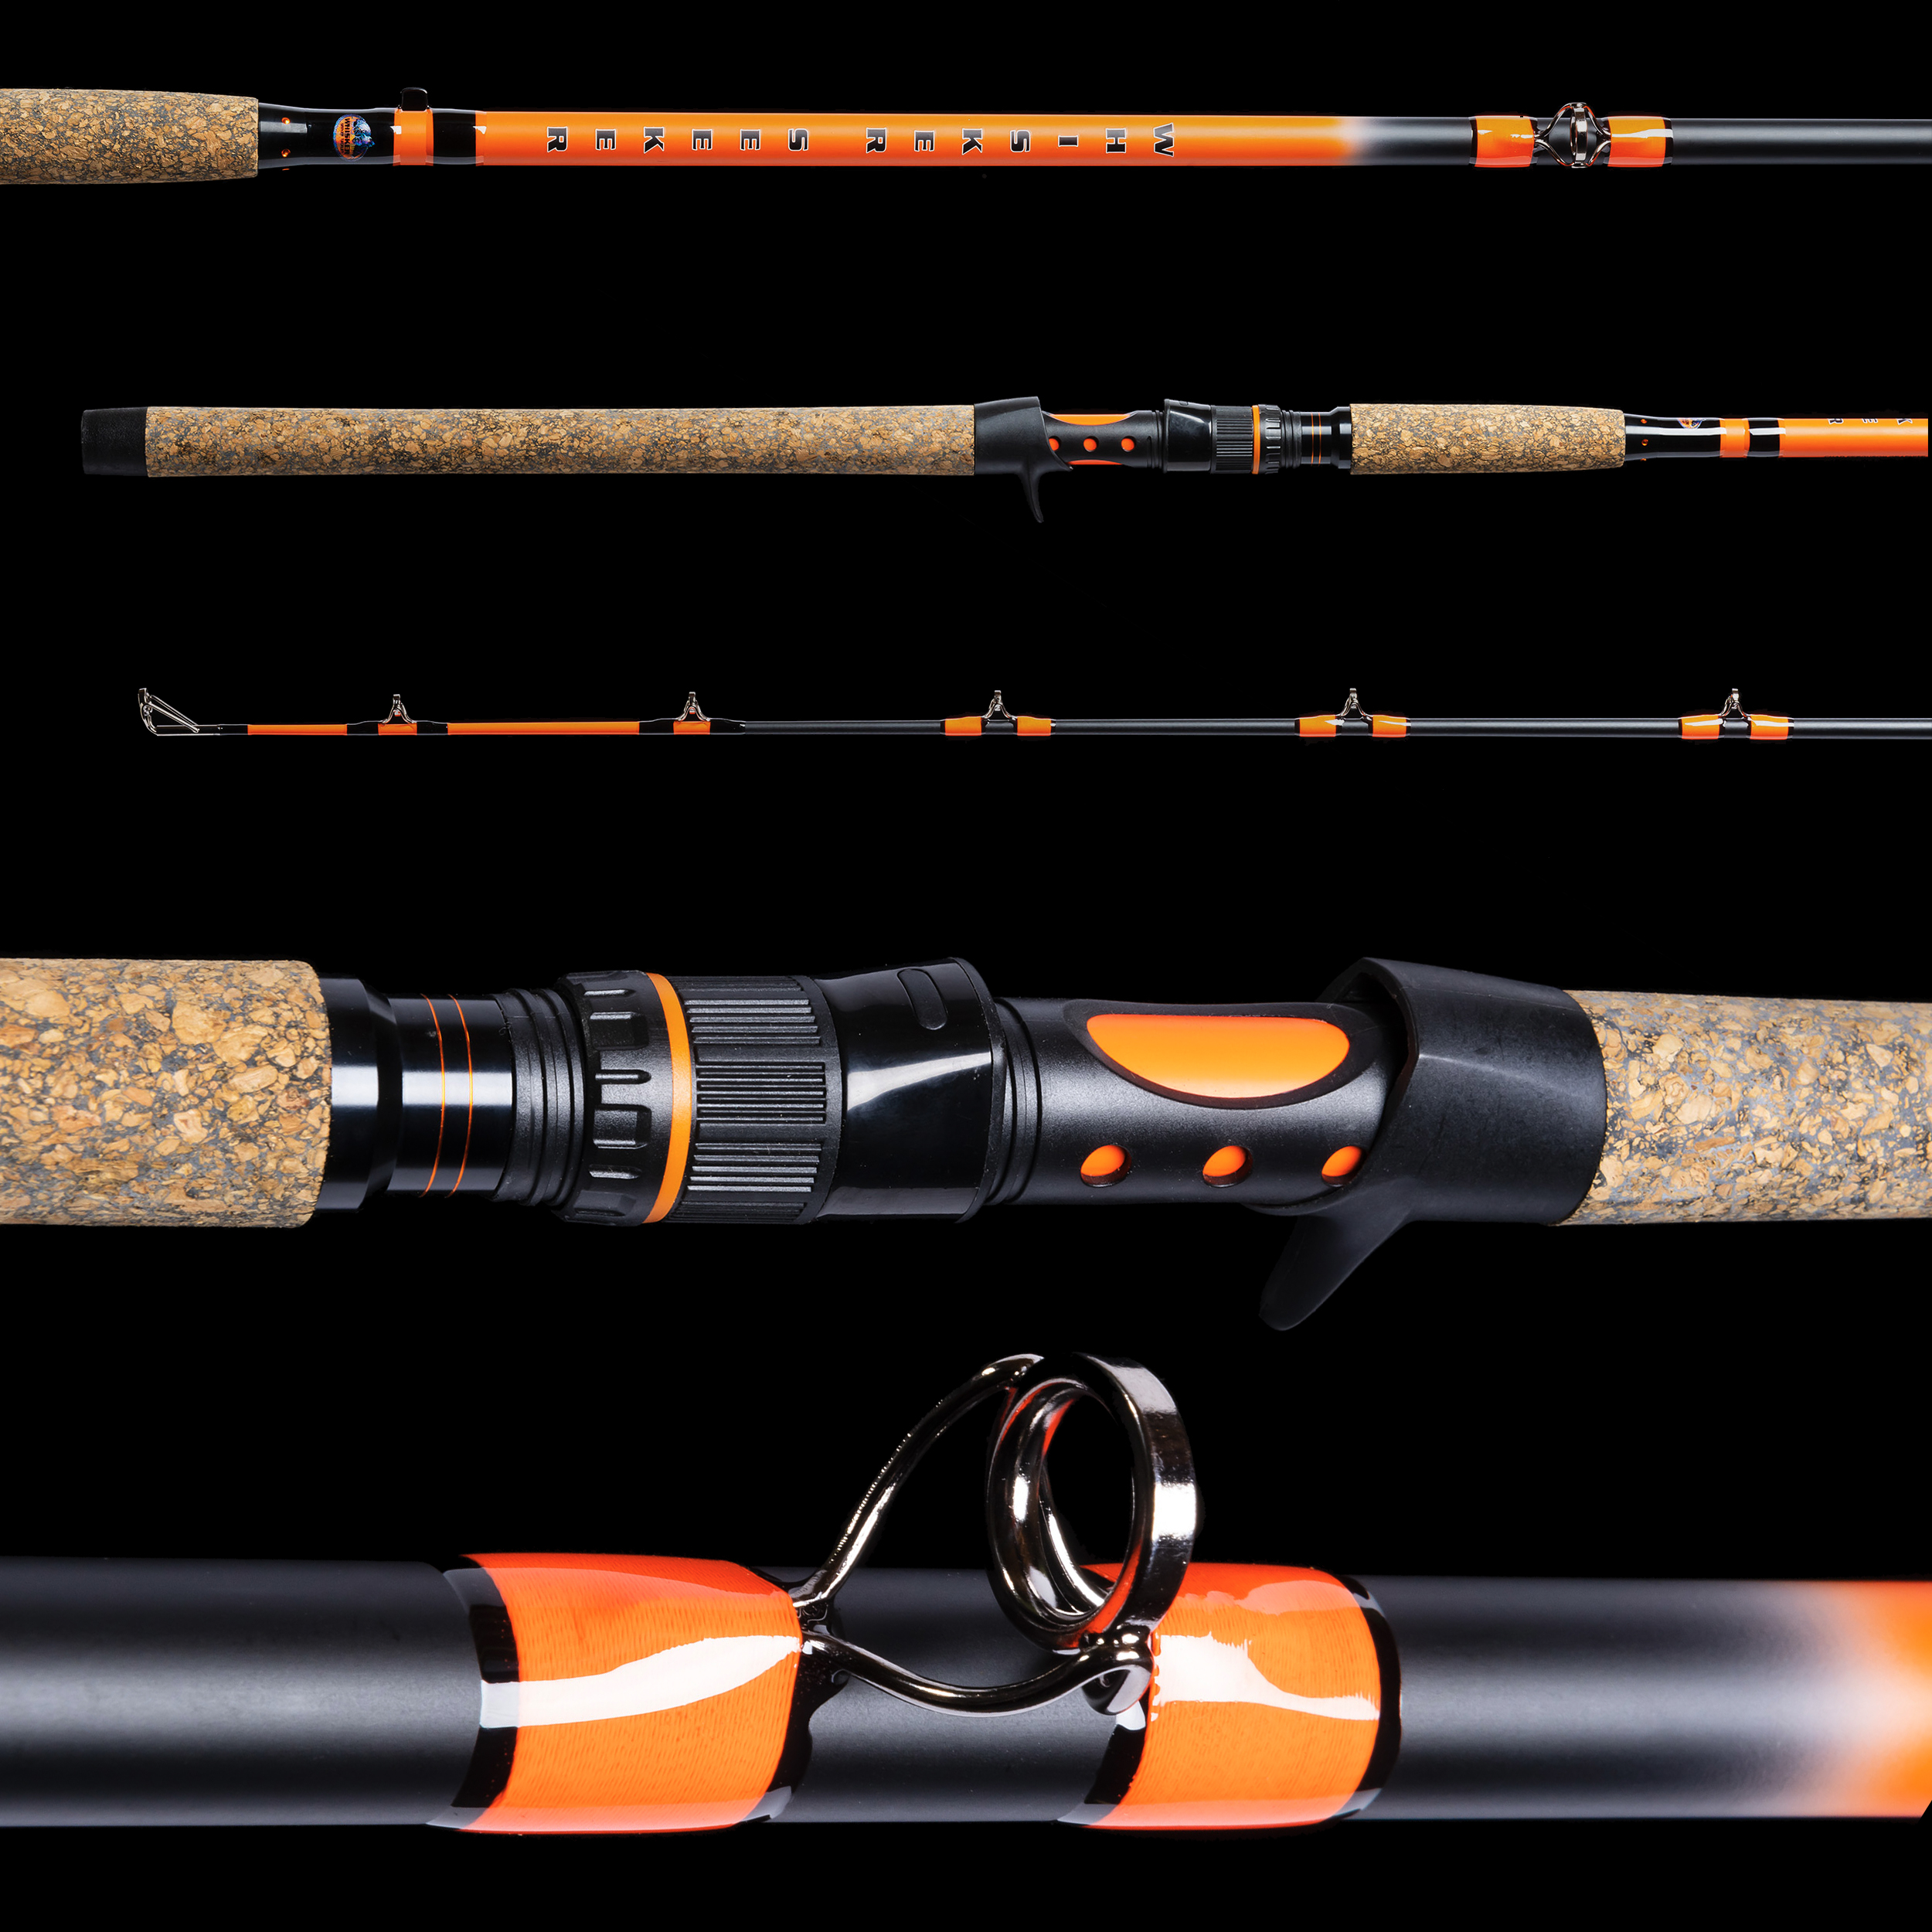 mini fishing rods, mini fishing rods Suppliers and Manufacturers at